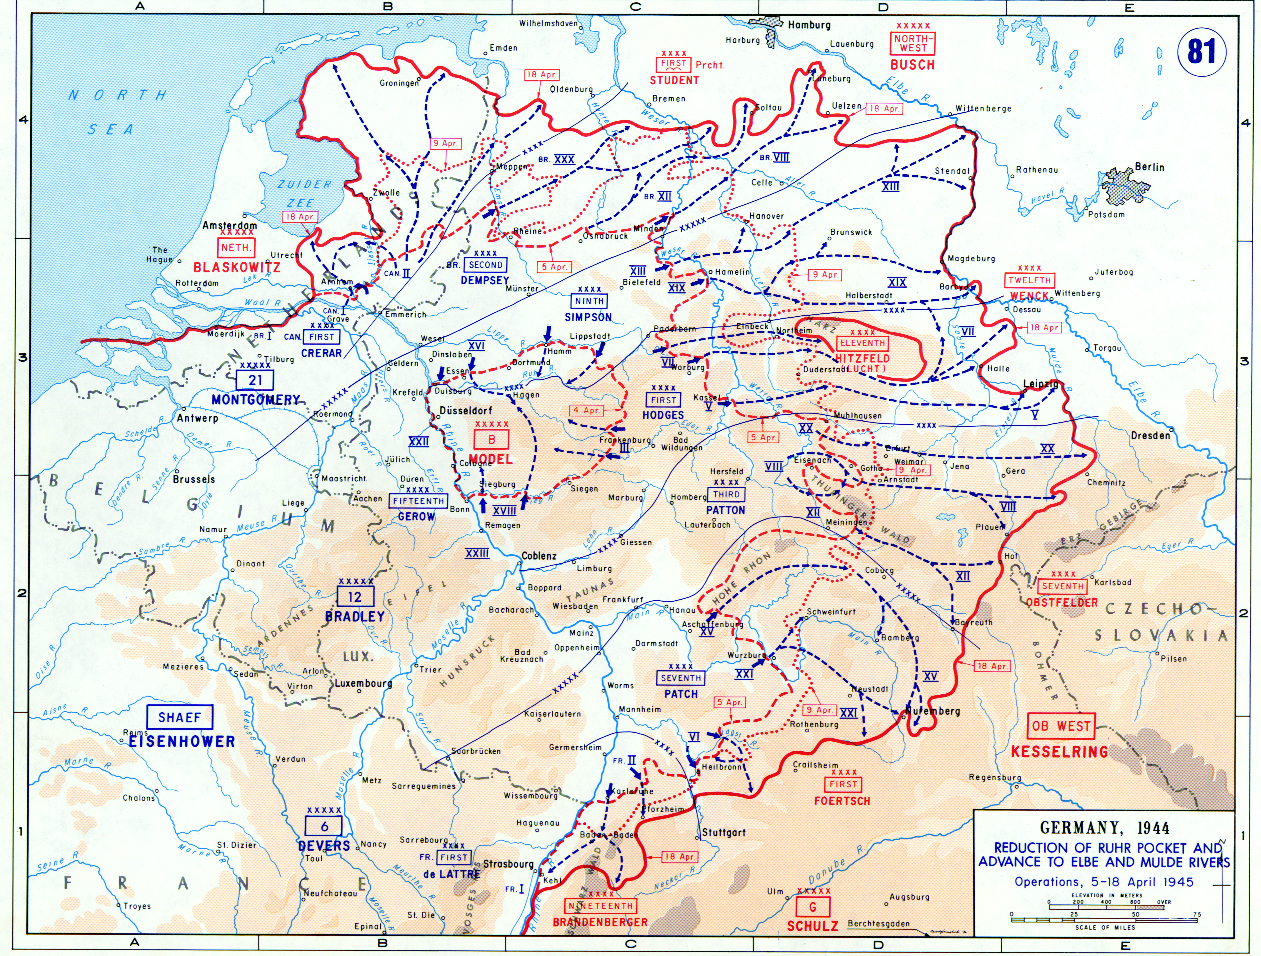 Map depicting Allied campaign in the Ruhr, Elbe, and Mulde regions, 5-18 Apr 1945